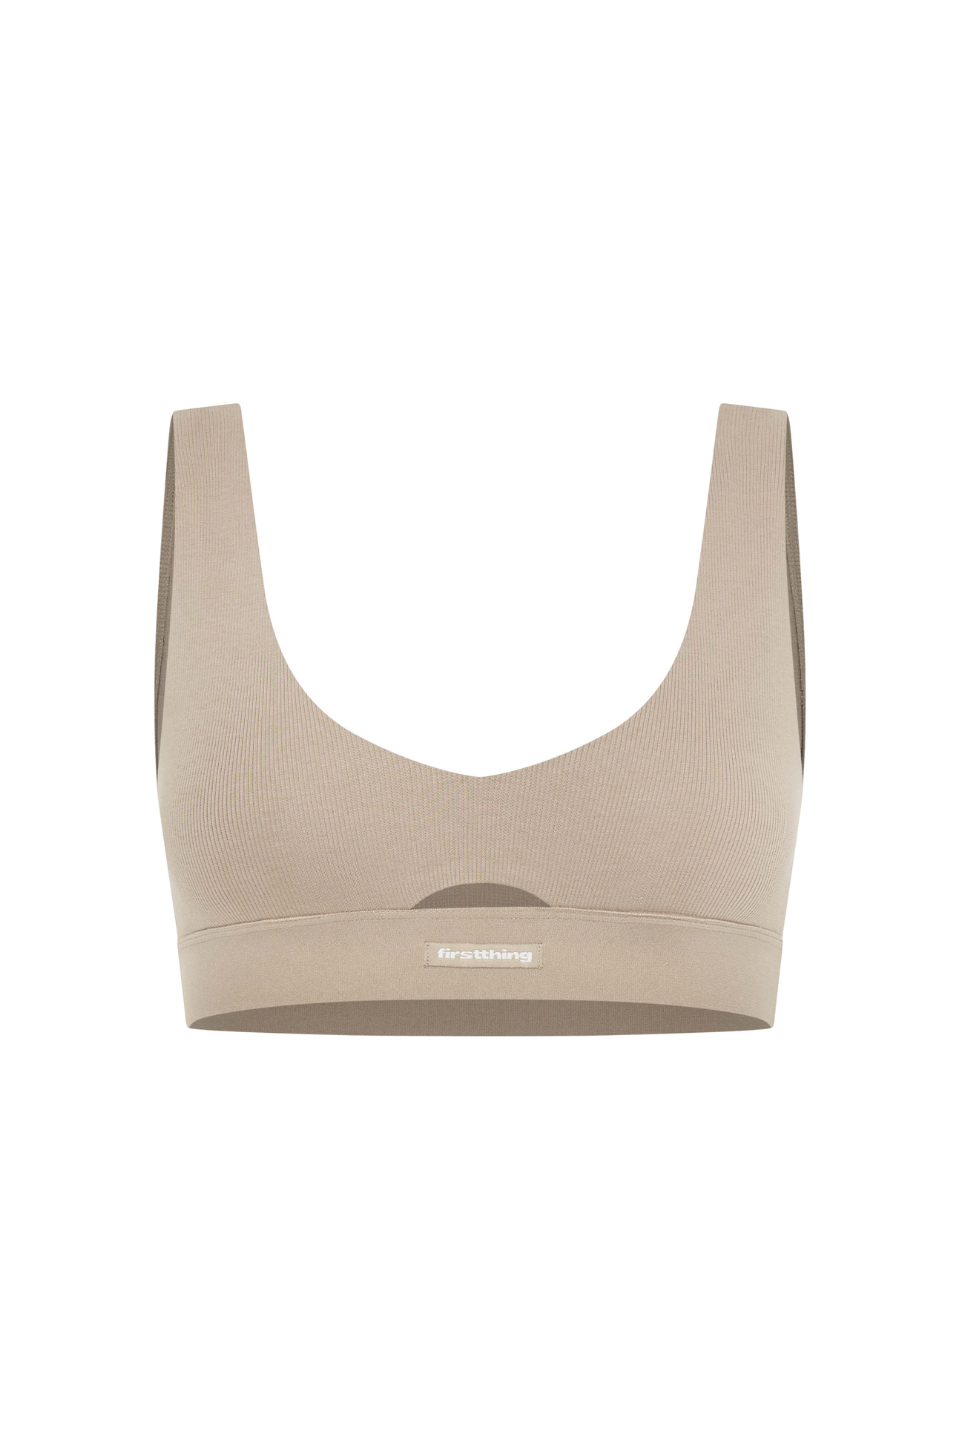 The Ribbed Crop Top, Bras - First Thing Underwear